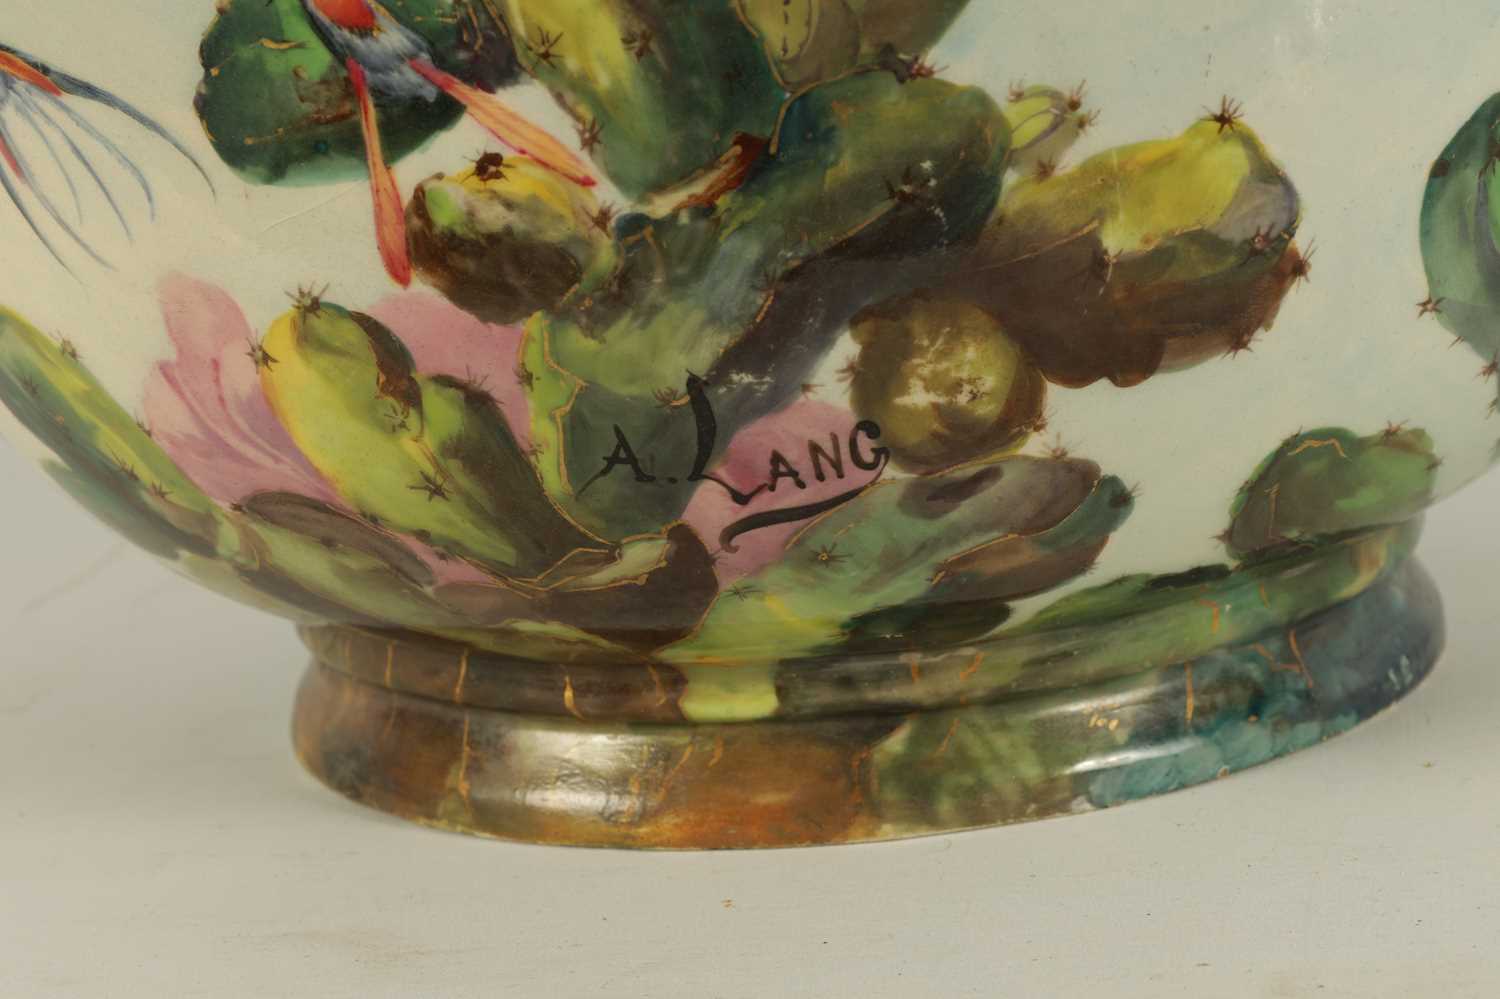 A LARGE 20TH CENTURY ART POTTERY BULBOUS JARDINIERE SIGNED A. LANG - Image 3 of 6